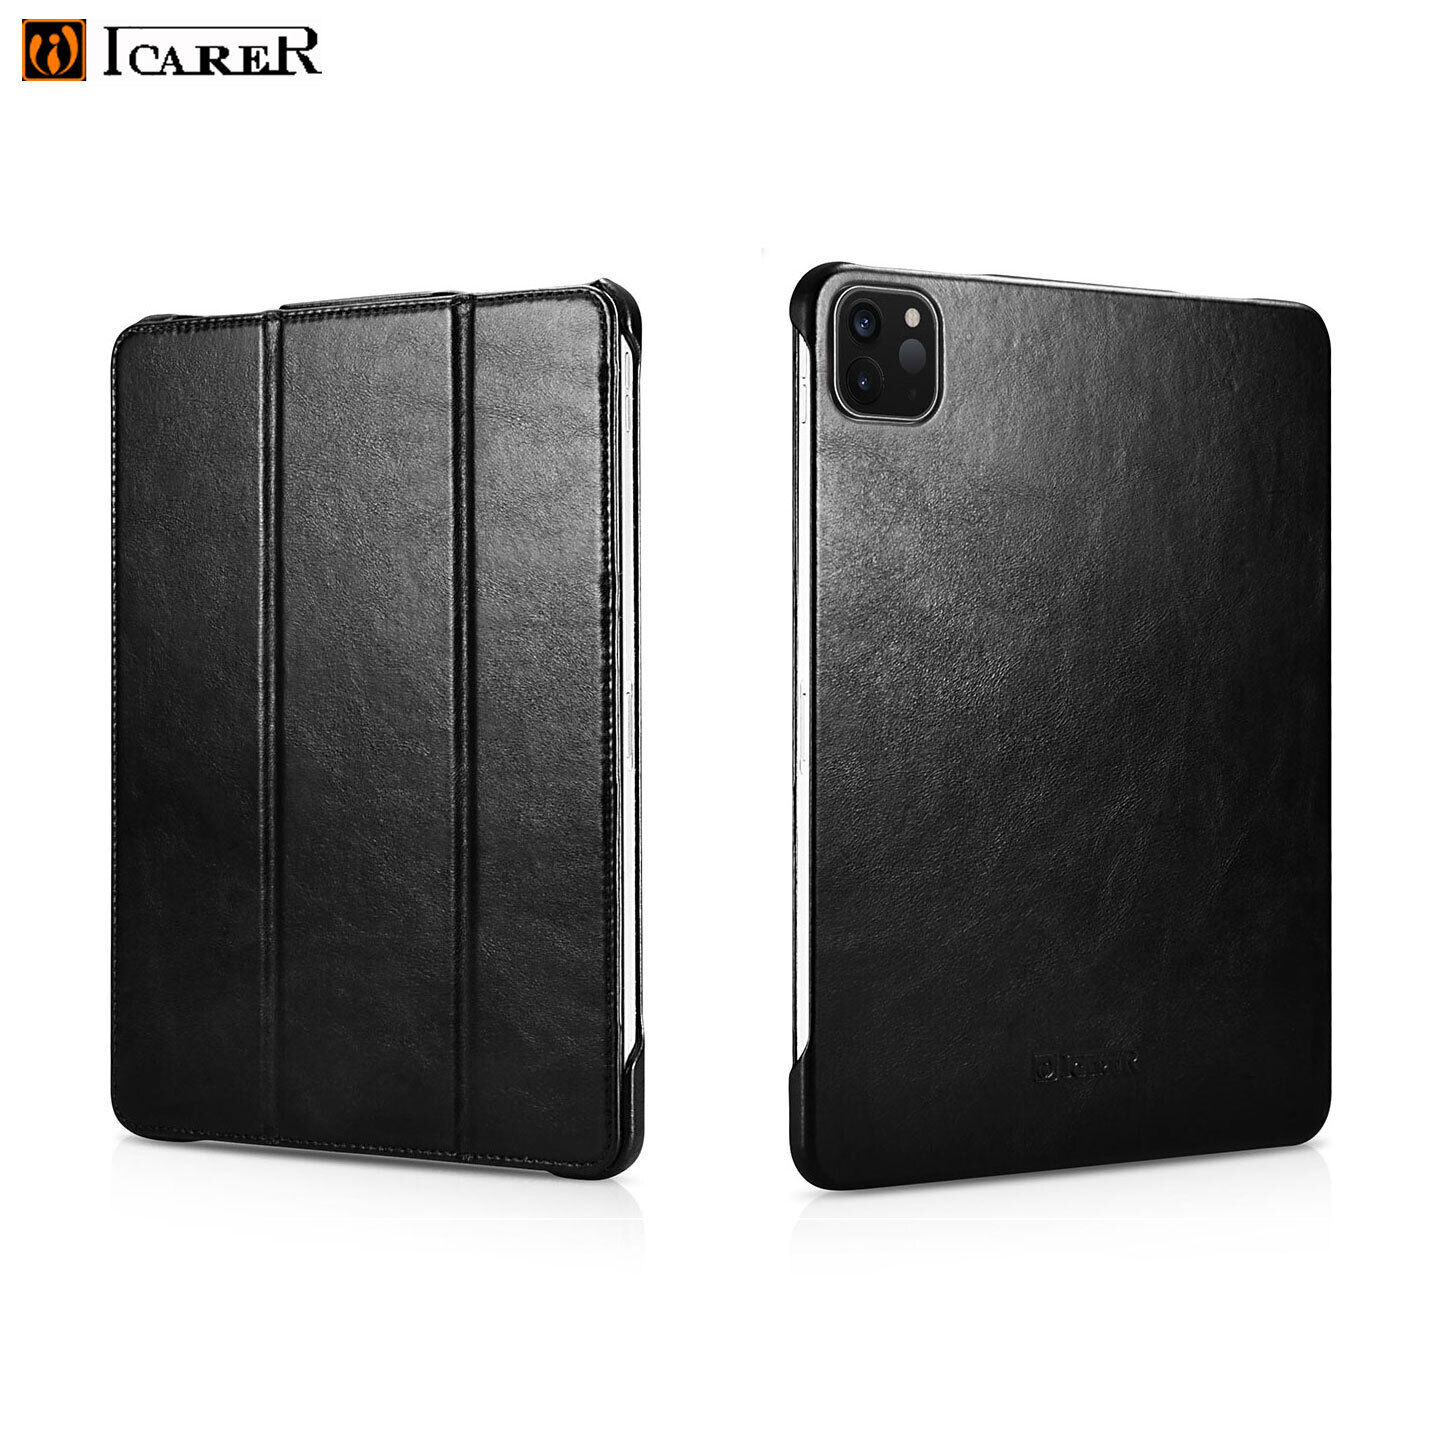 NEW Luxury ICARER GENUINE Leather Tri-Fold Stand Smart Case Cover For Apple iPad